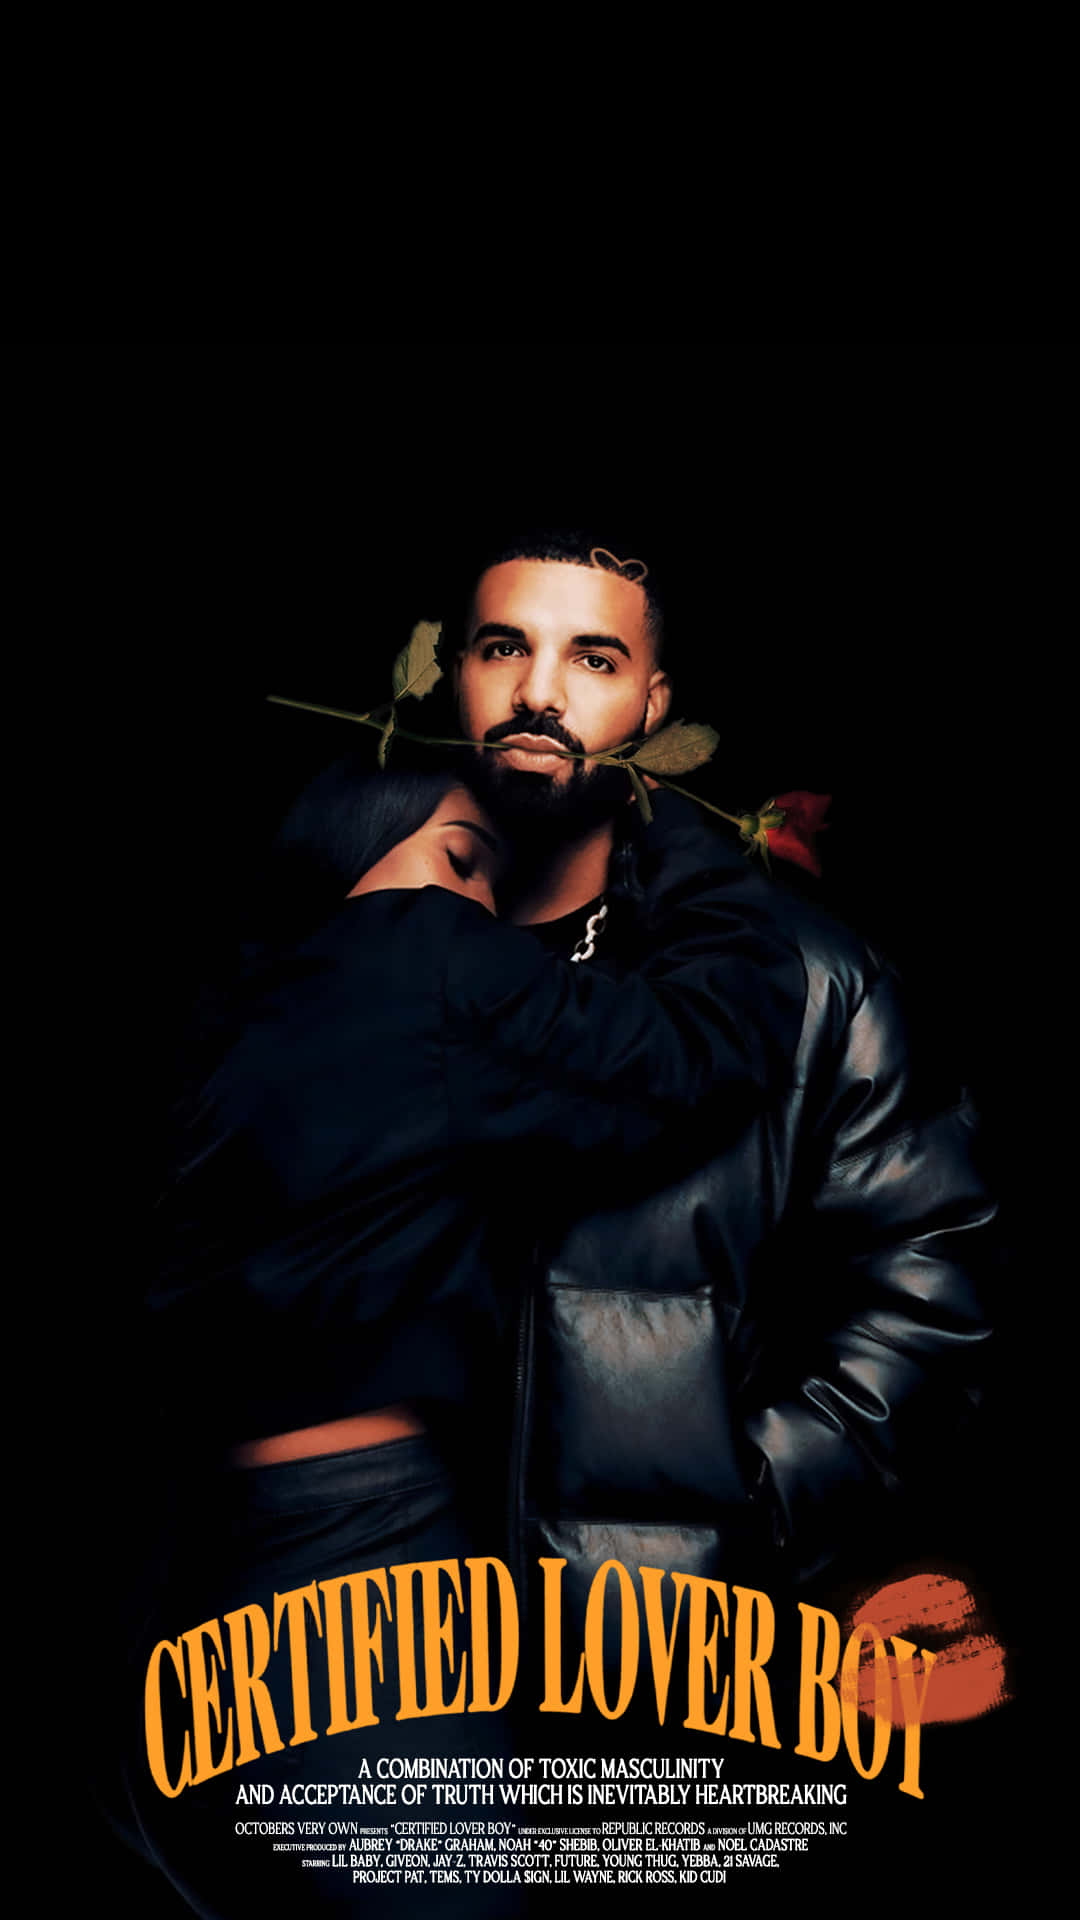 Aesthetic Drake is Bringing His Signature Style to the New Year Wallpaper